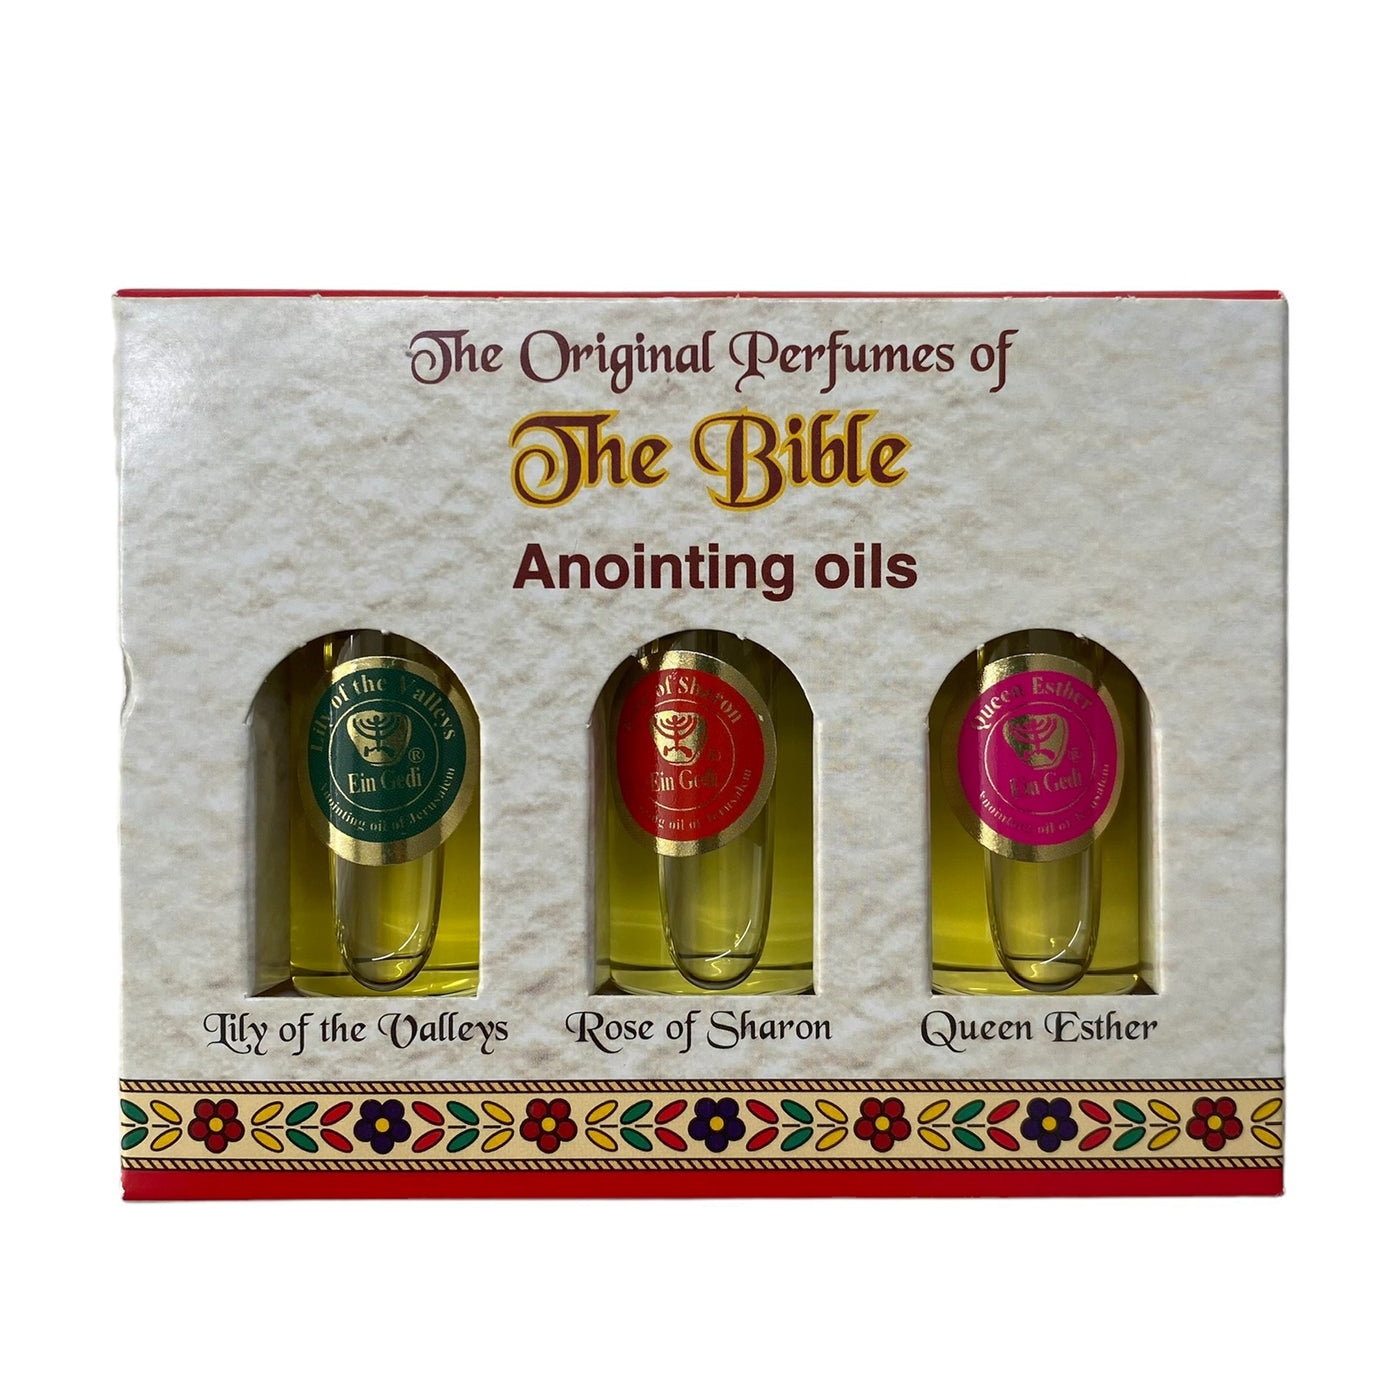 The Original Perfumes of The Bible trio pack anoiting oil from Holyland Jerusalem (Rose of sharon)